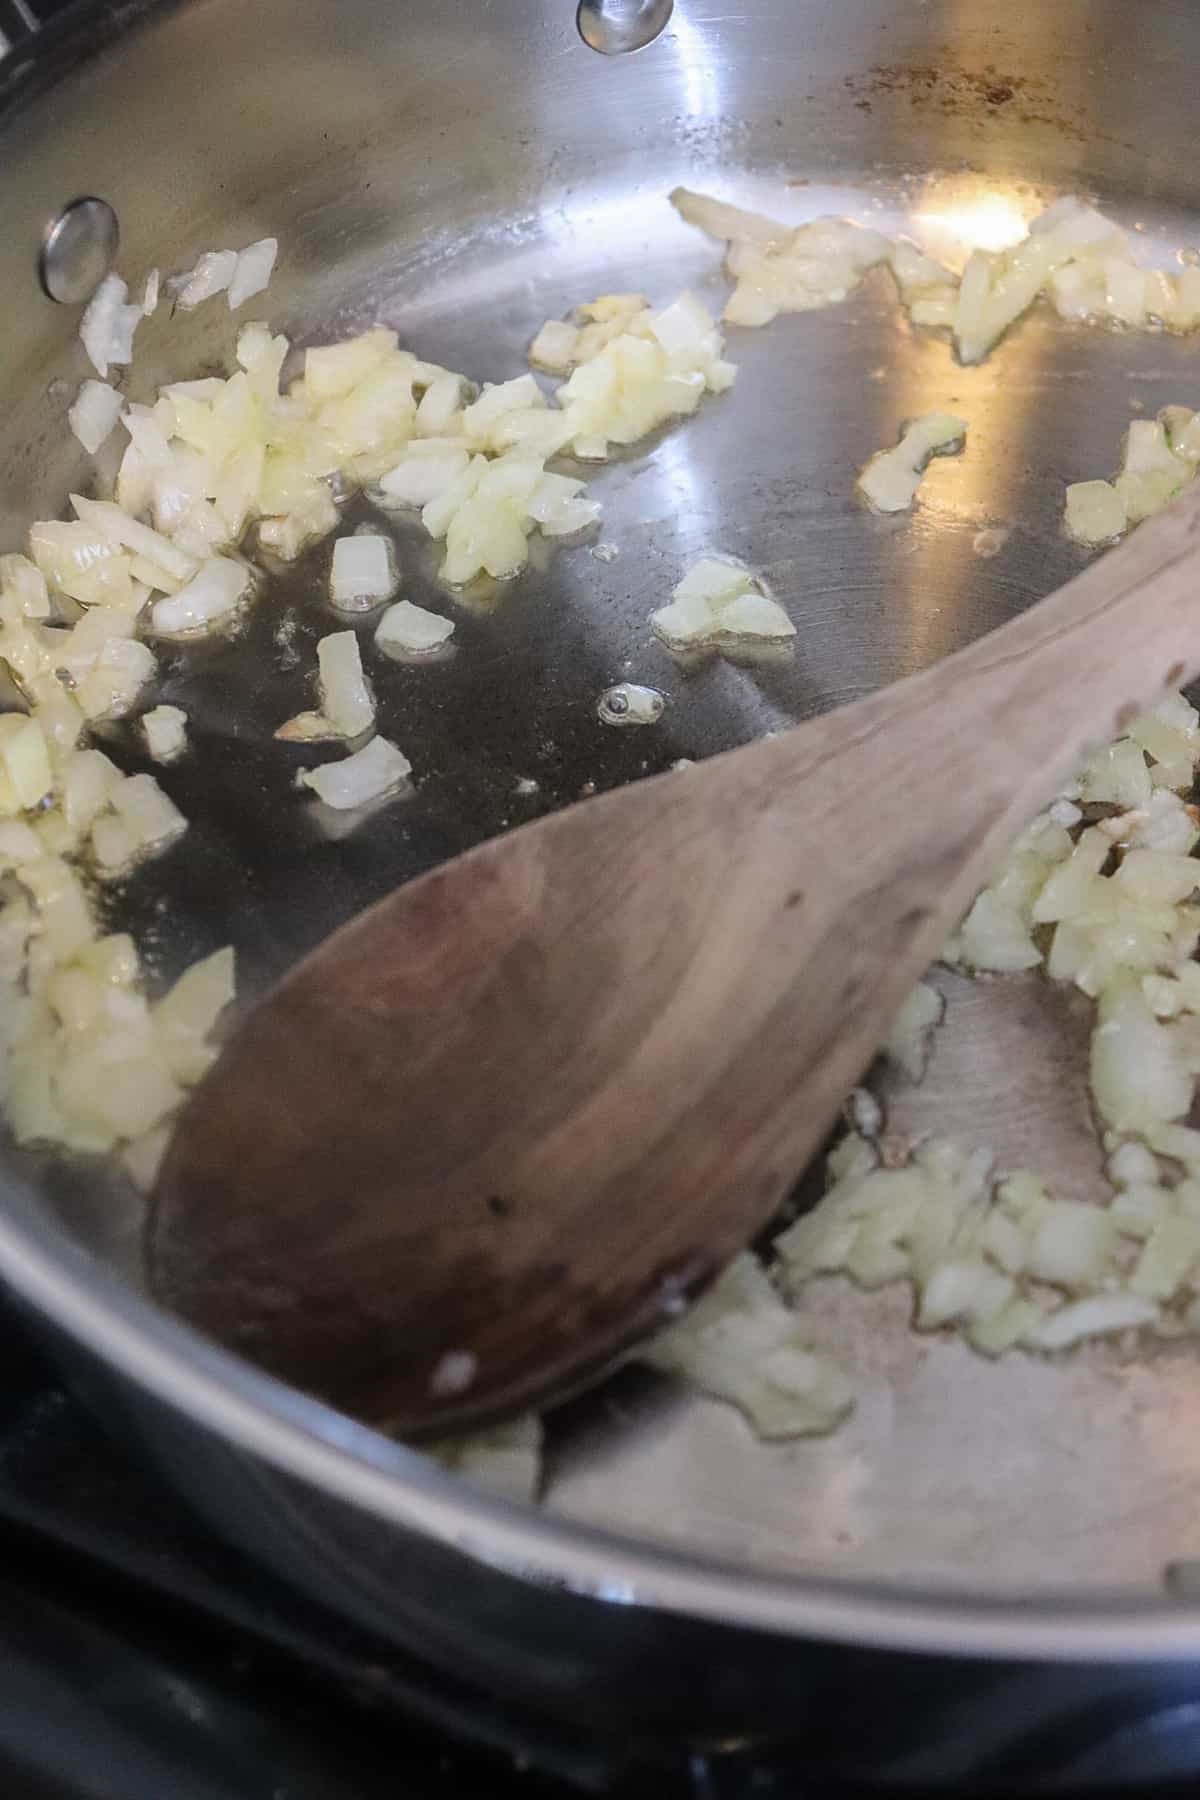 diced onions being sauteed.